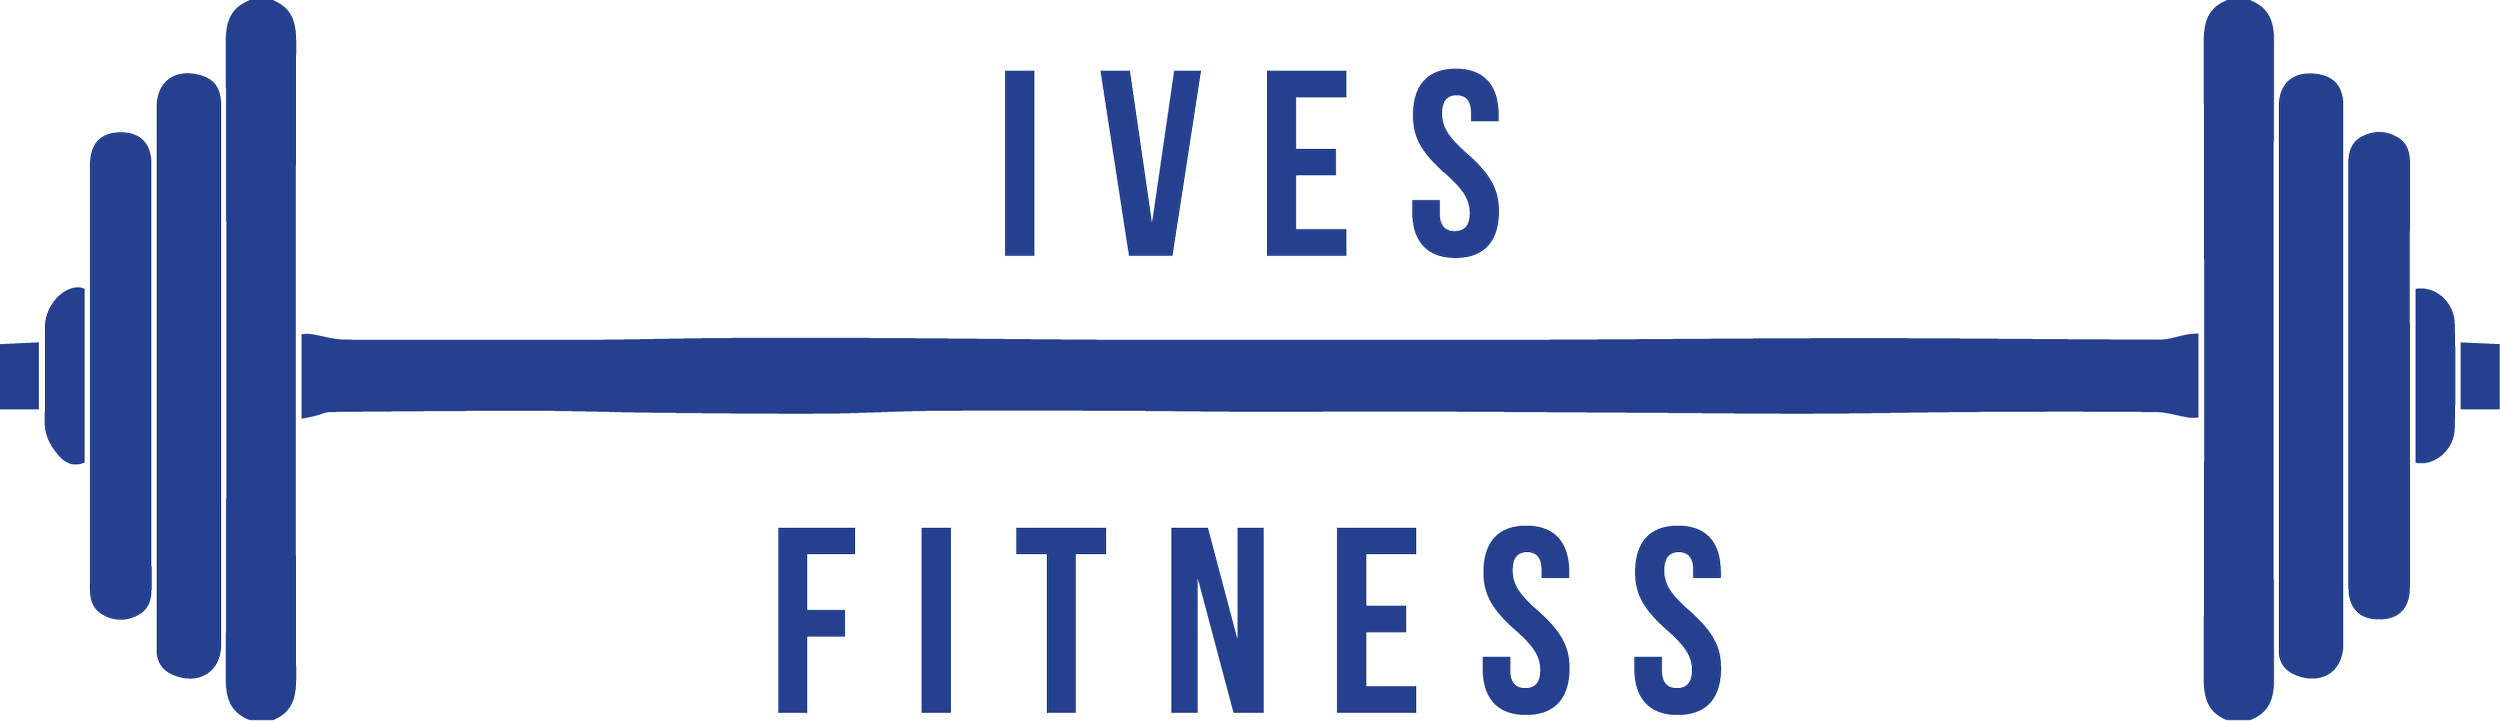 Ives Fitness